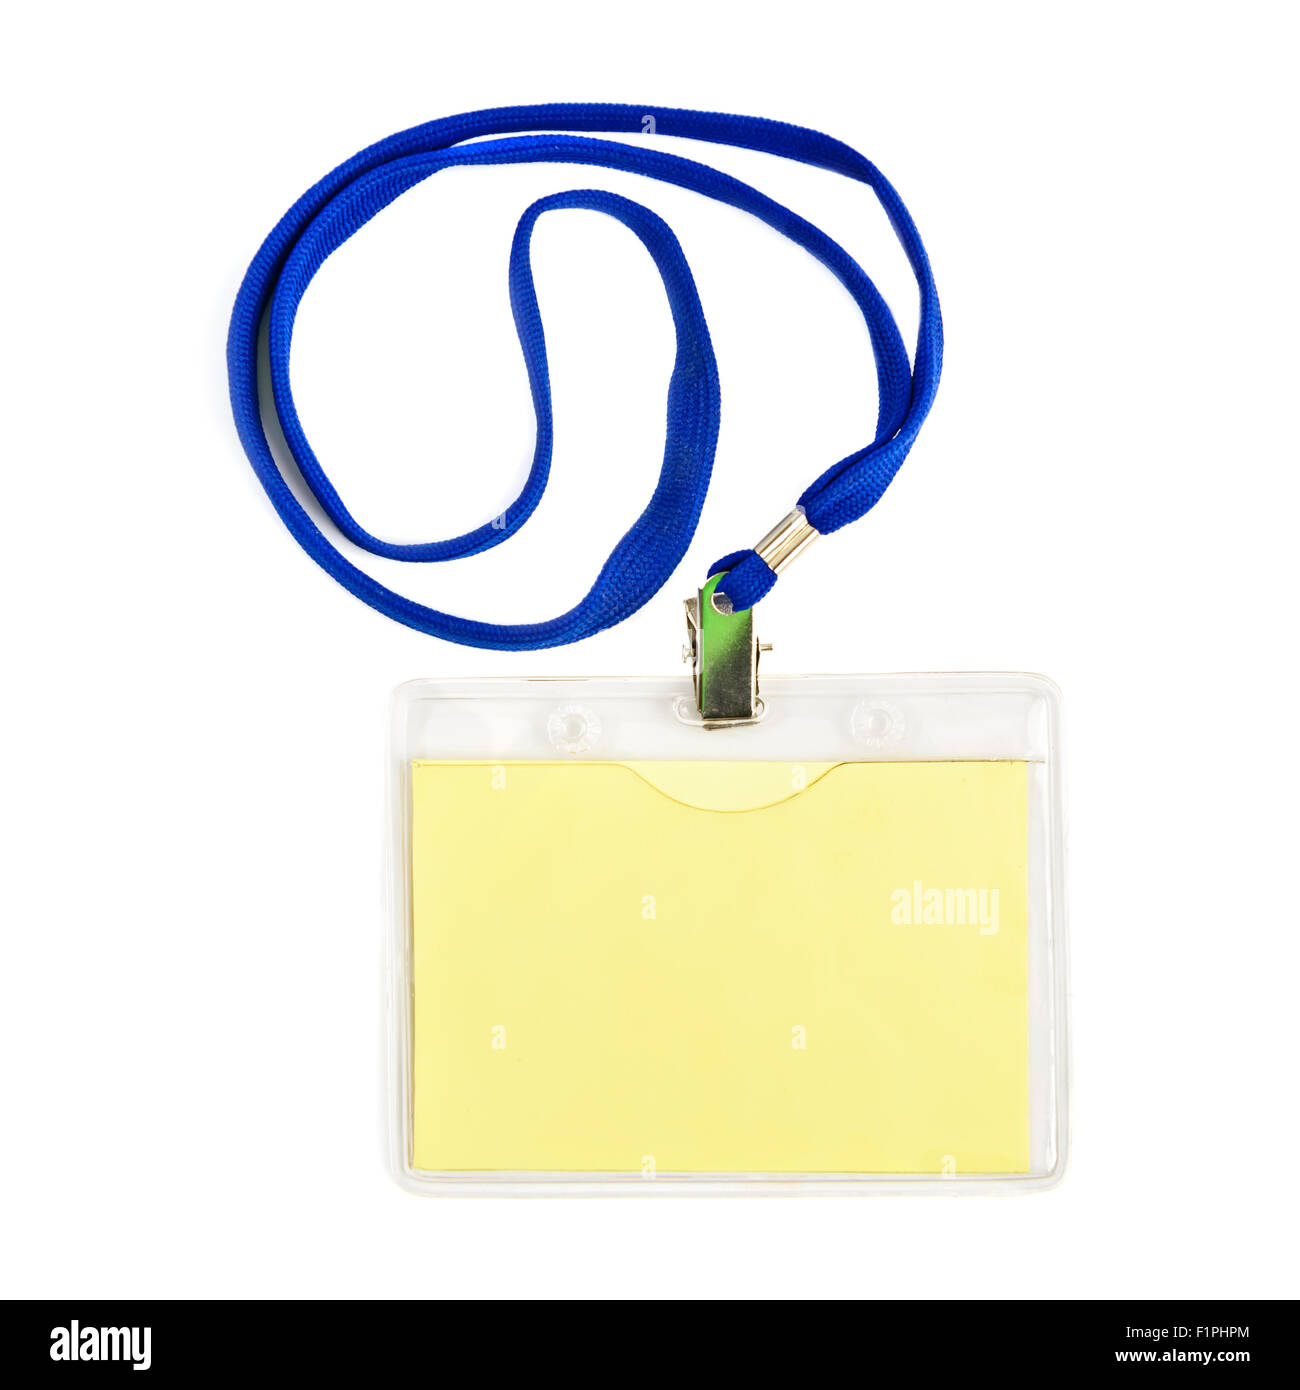 Name id card badge with cord (rope) isolated Stock Photo